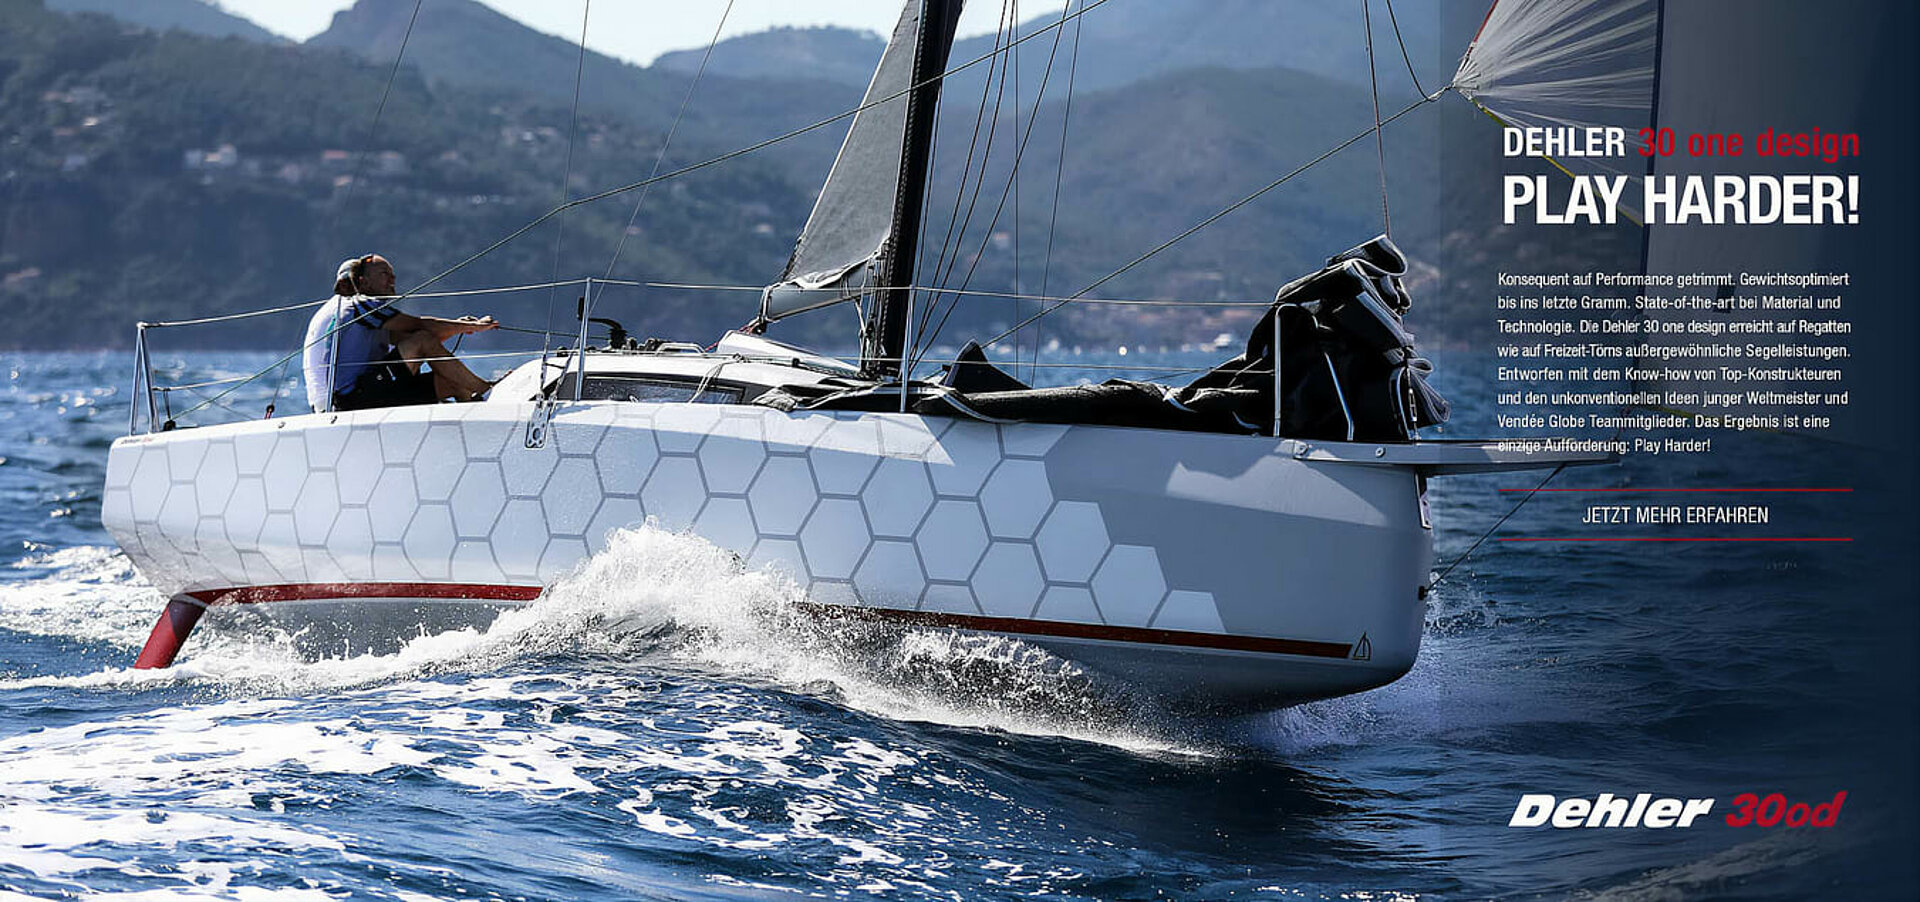 Dehler 30 one design high performance sailboat made for sail racing